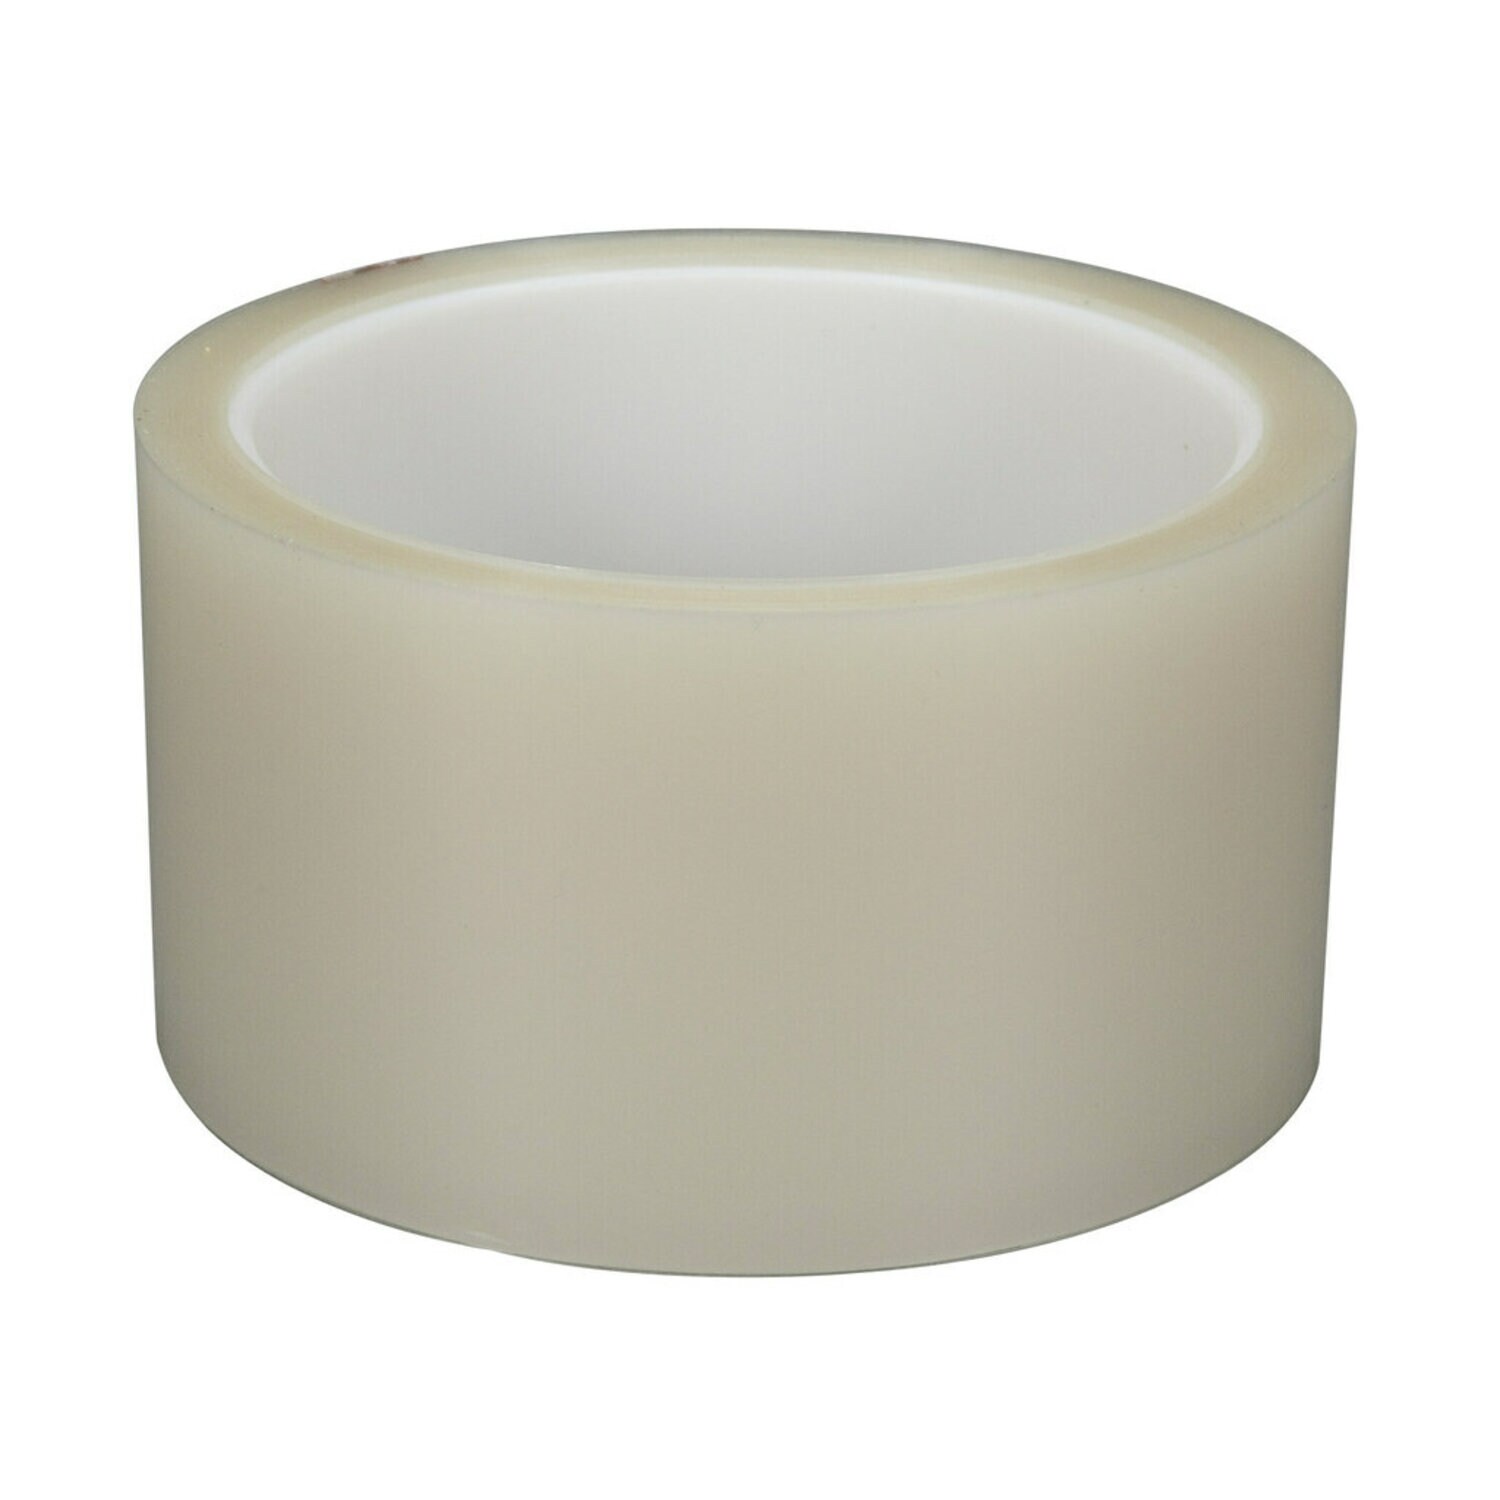 7010048690 - 3M Polyester Film Tape 853, Transparent, 4 in x 72 yd, 2.2 mil, 12
Rolls/Case